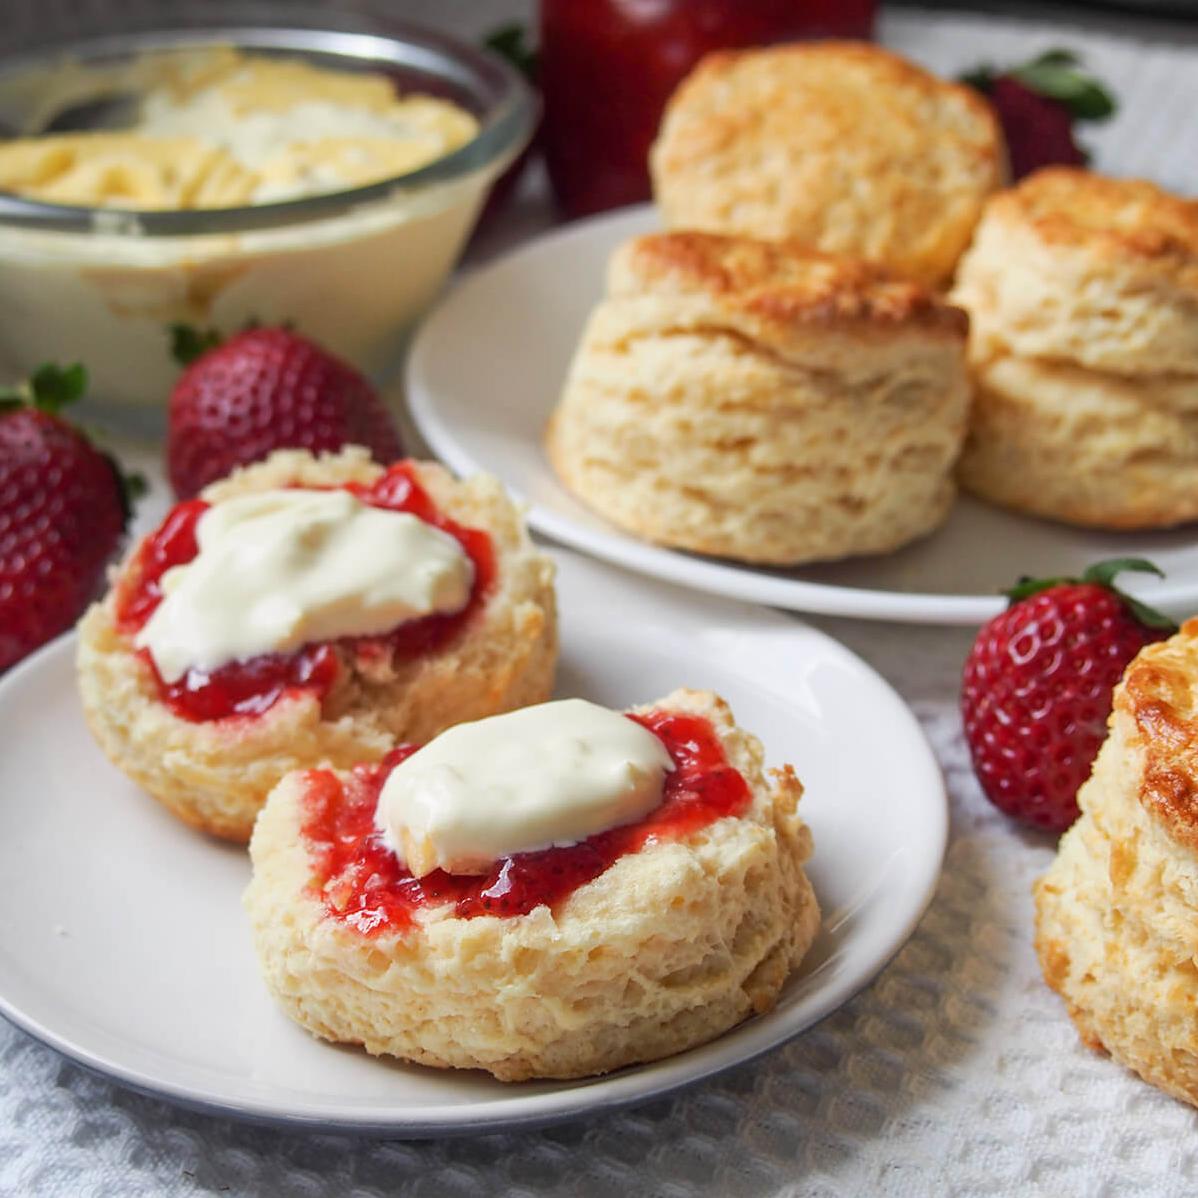  These scones are the perfect way to celebrate a royal occasion or to simply indulge in a British treat.